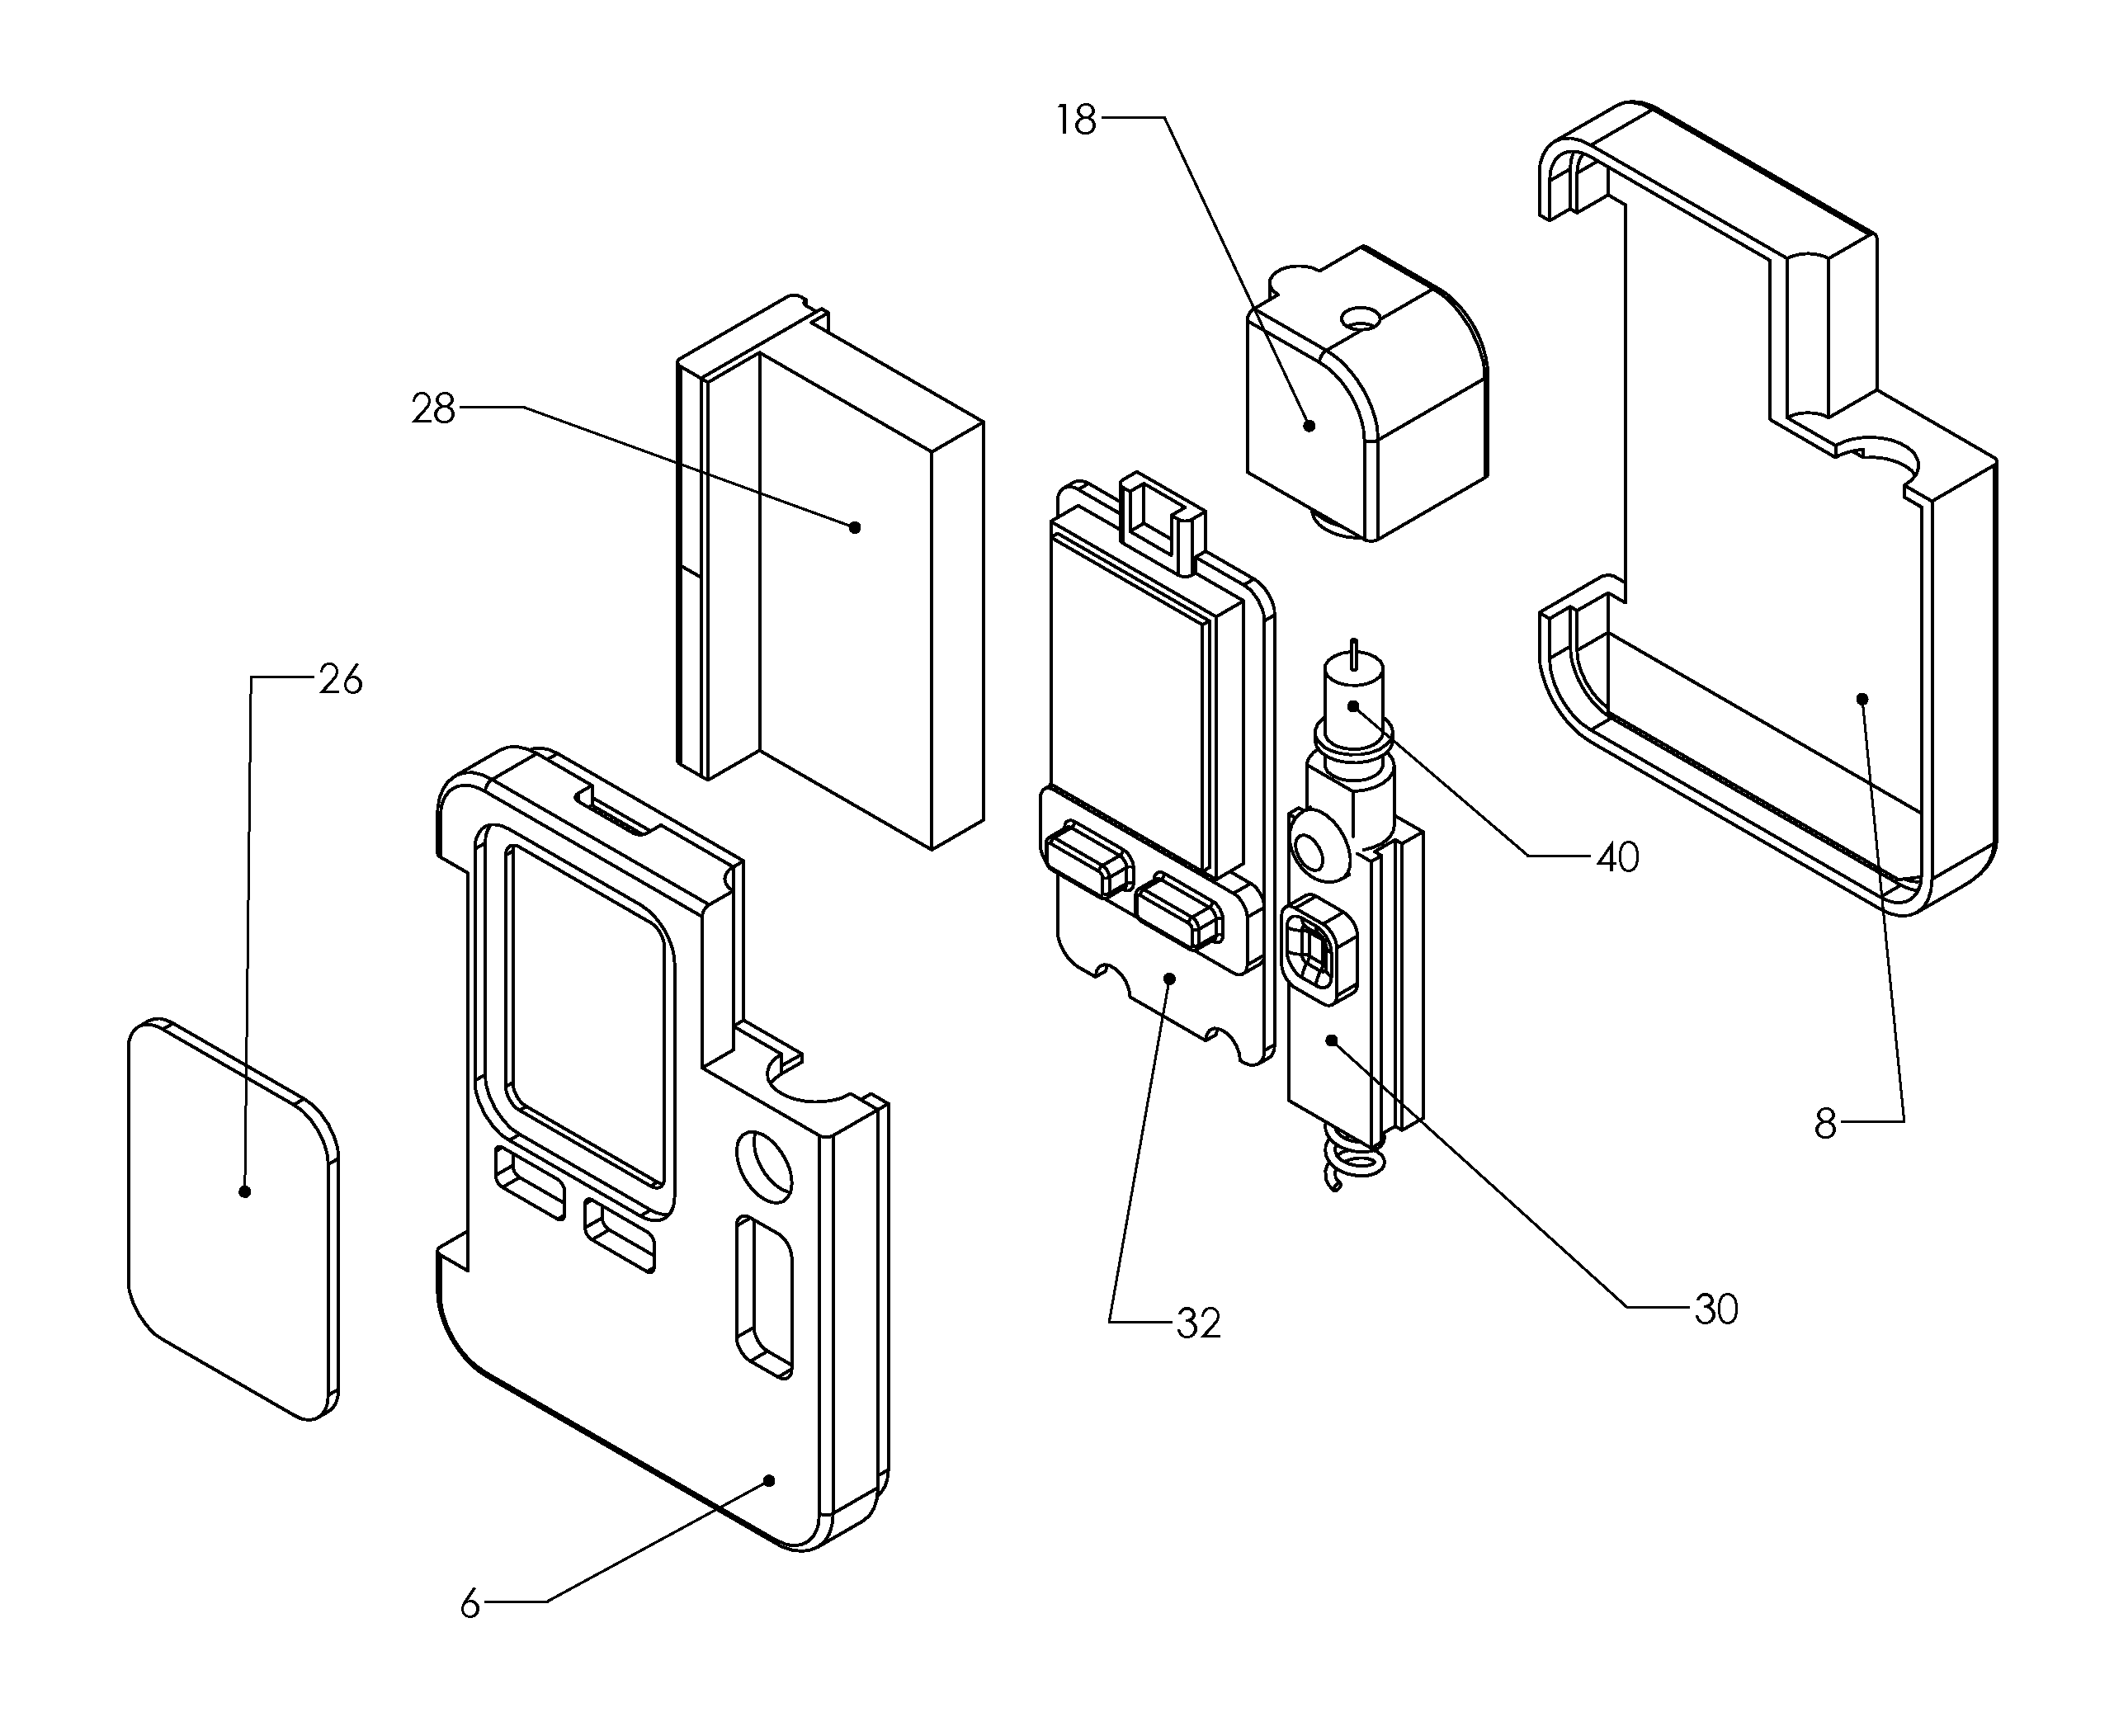 Self-contained blood glucose testing apparatus